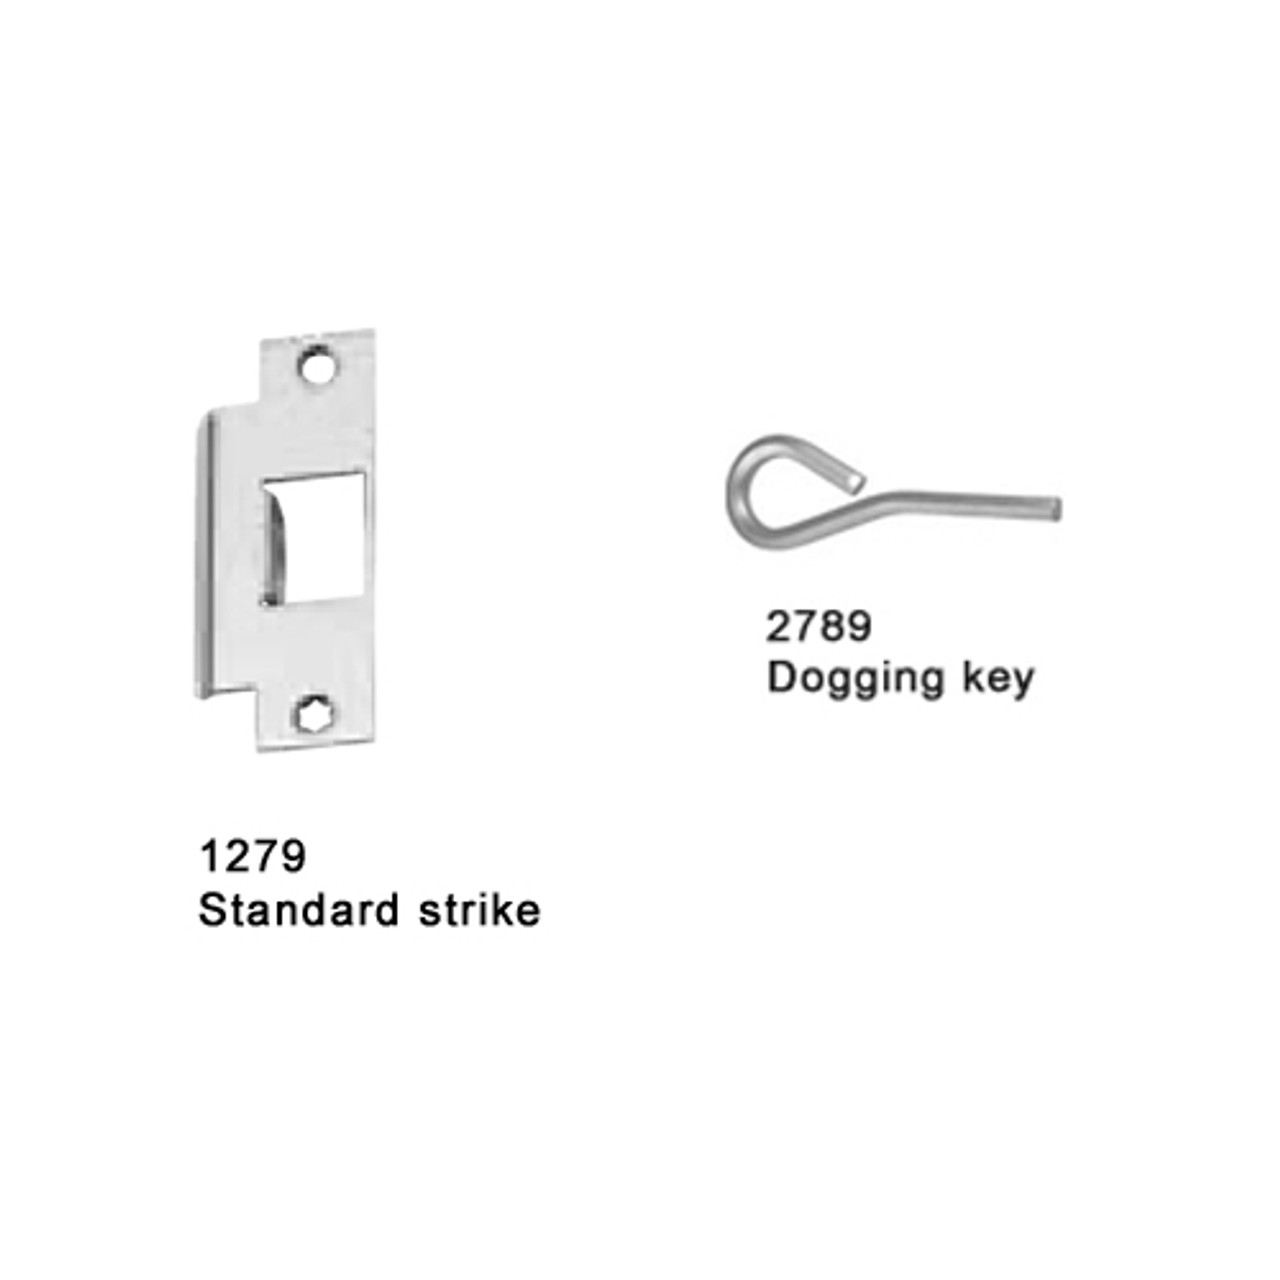 25-M-TP-US26D-3-RHR Falcon 25 Series Mortise Lock Devices with 512TP Thumbpiece Trim in Satin Chrome